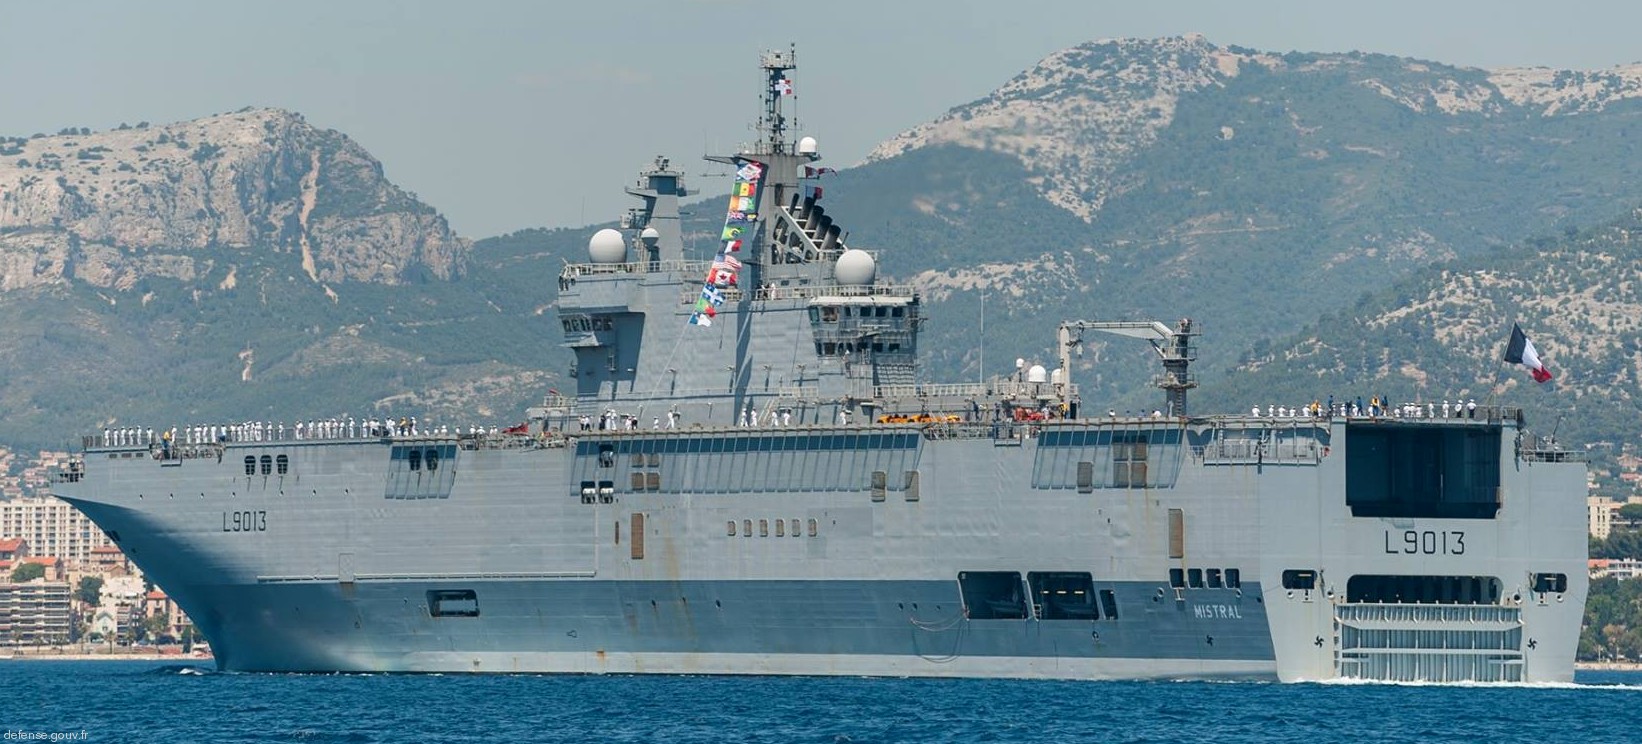 l-9013 fs mistral amphibious assault command ship french navy marine nationale 20